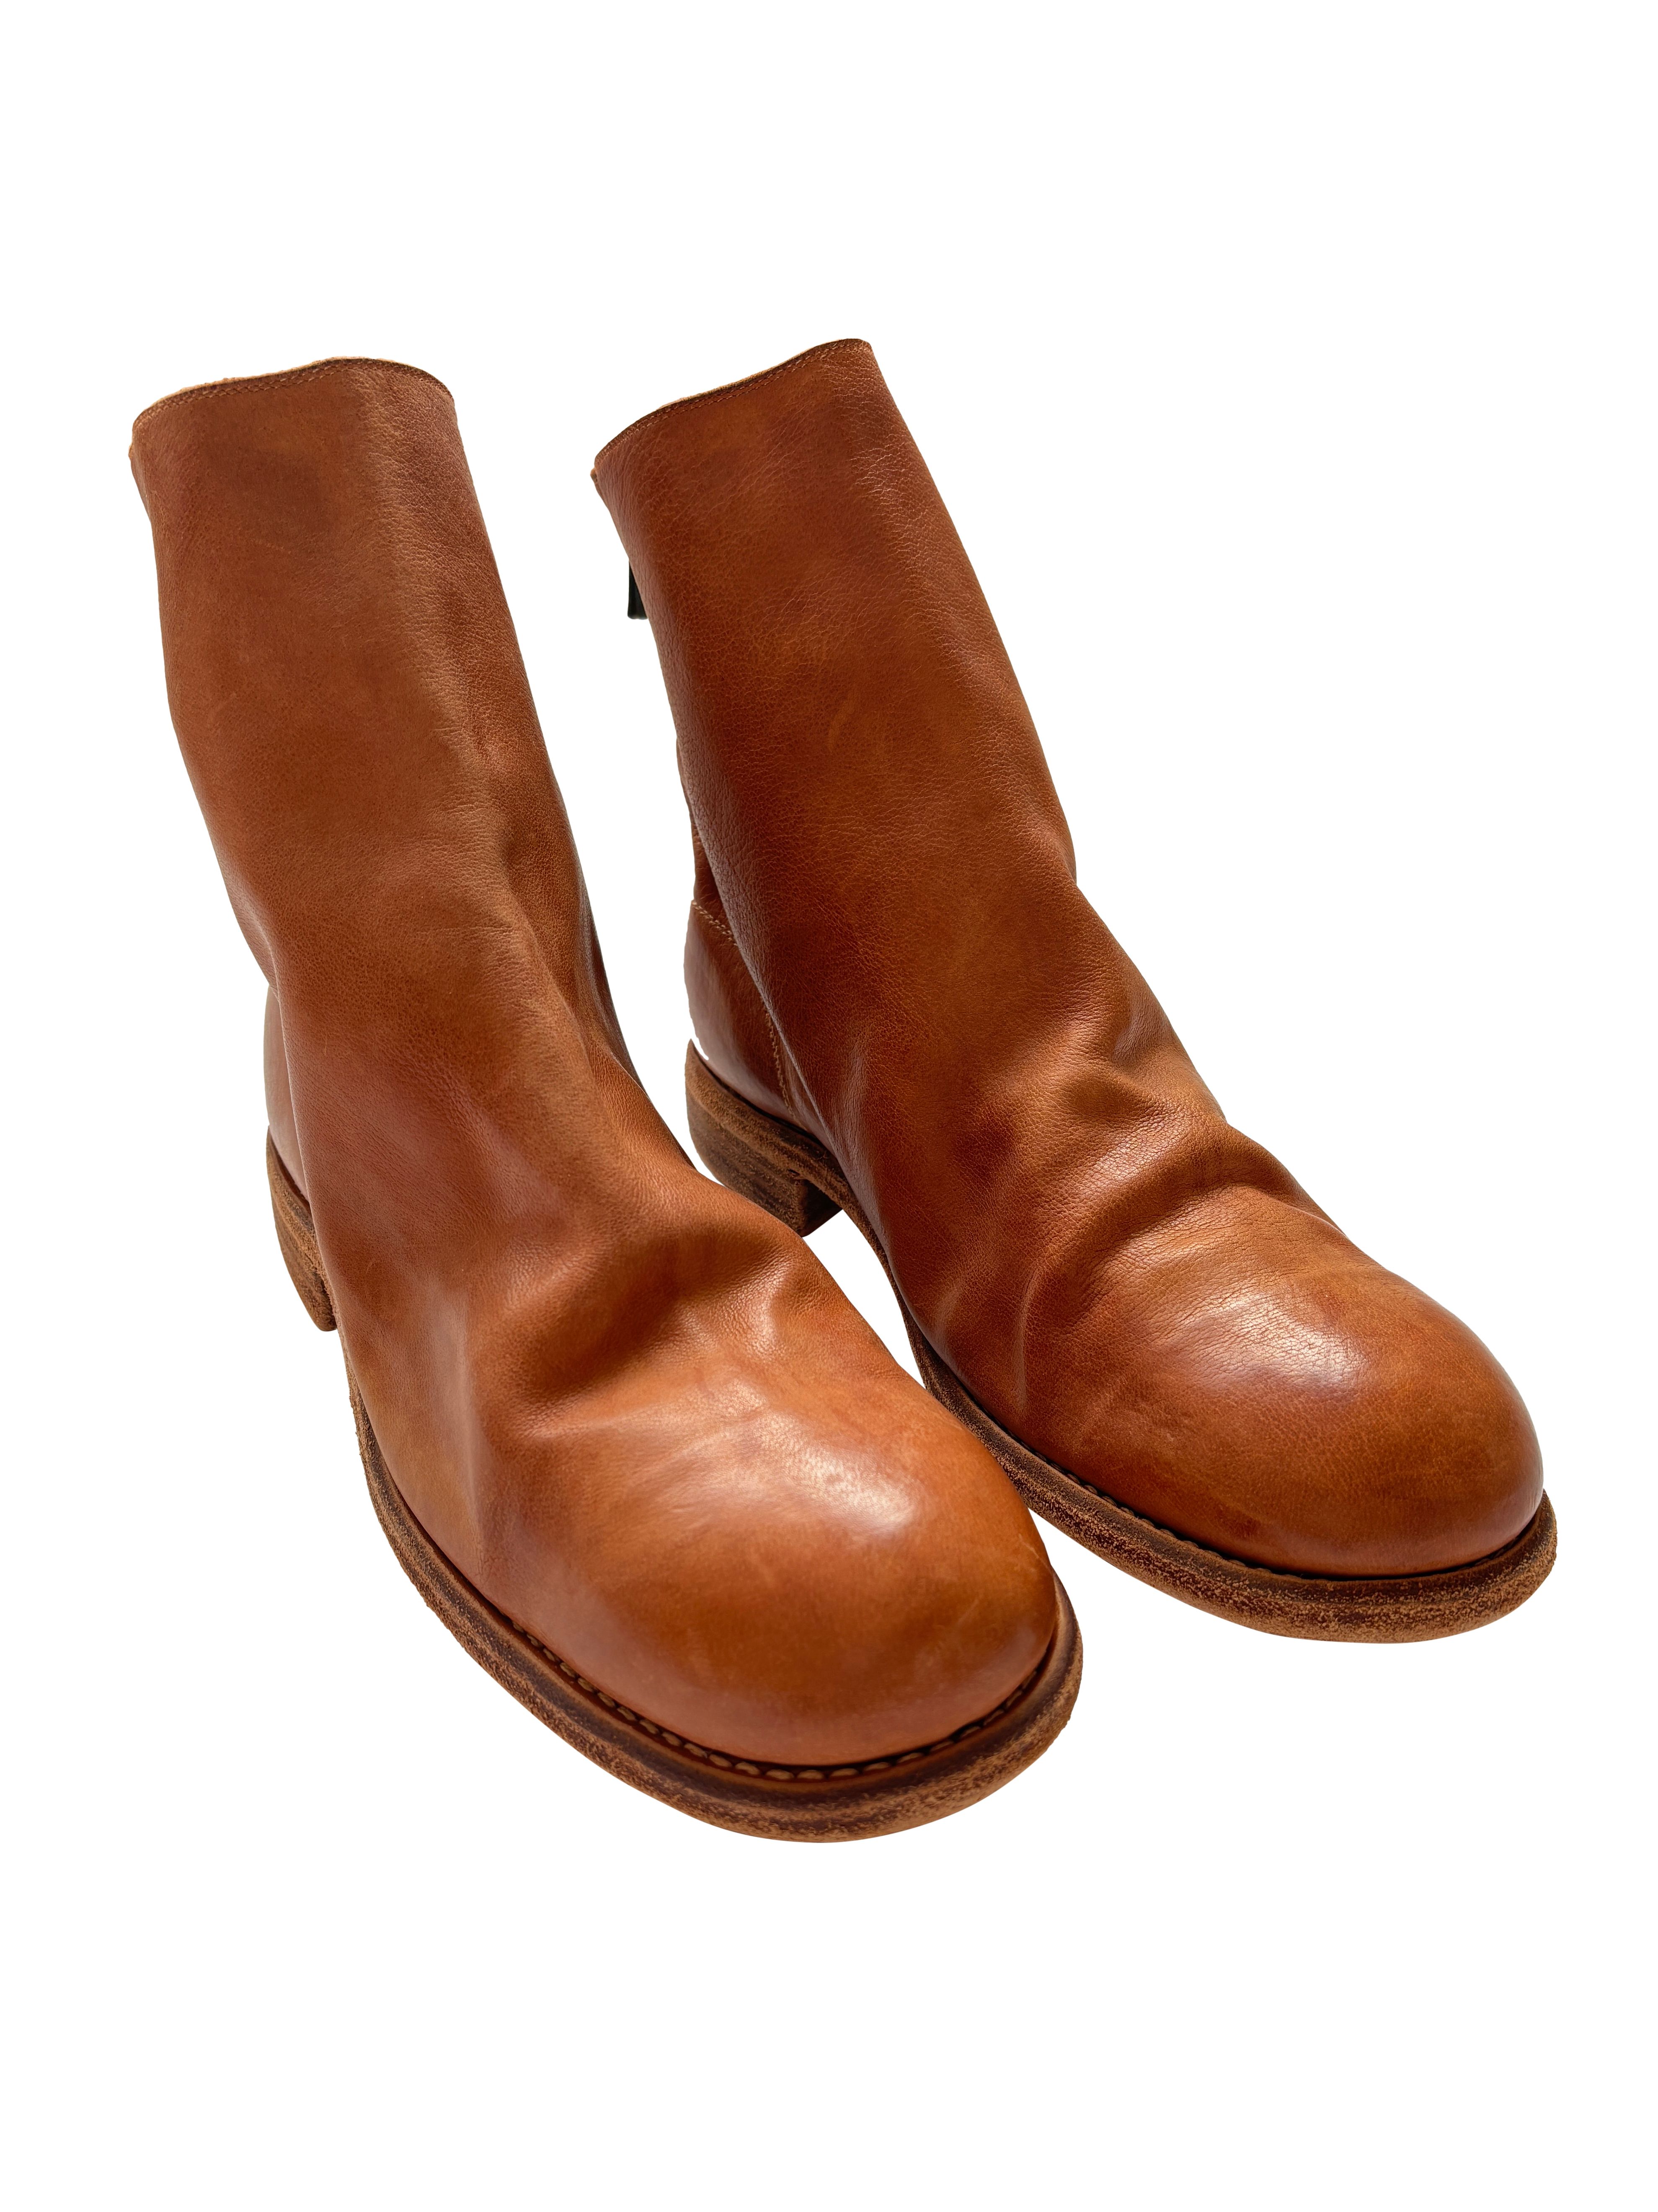 Pre-owned Guidi 986 Tan Leather Boot With Back Zippers